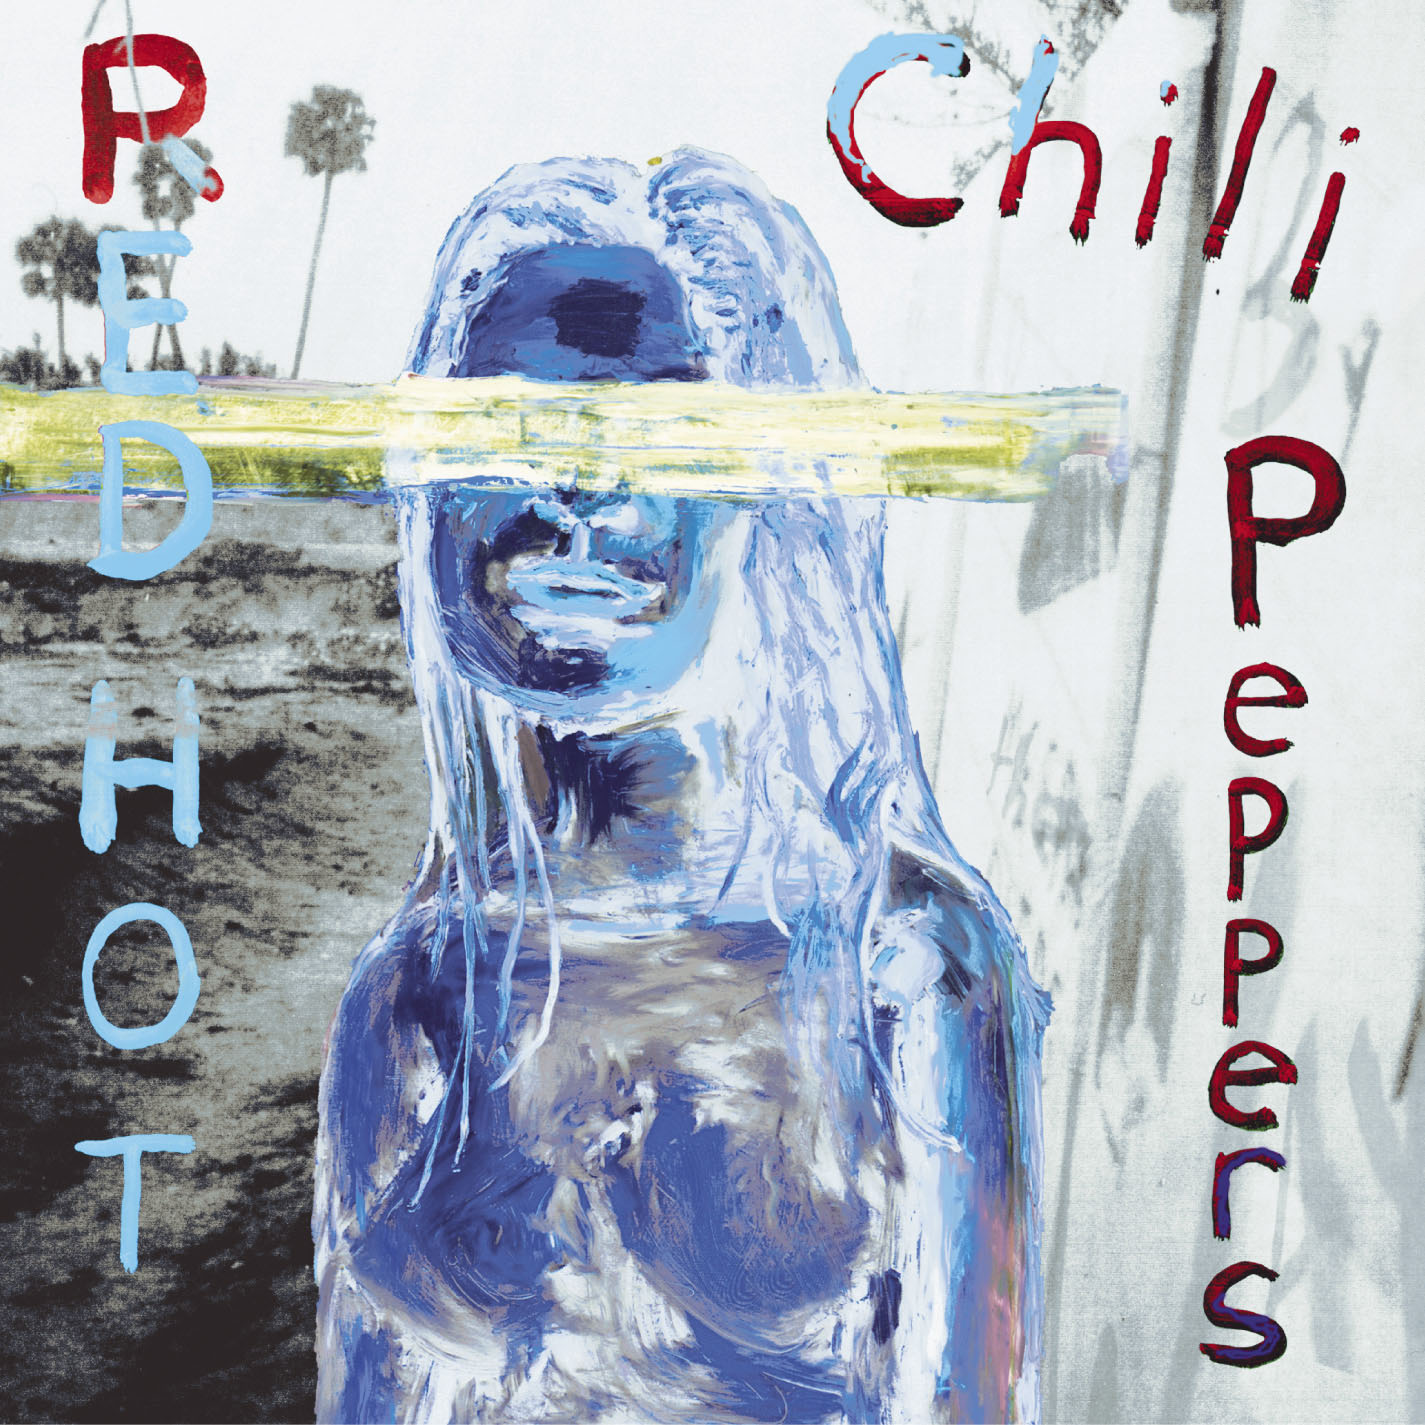 Red Hot Chili Peppers-By The Way-(9362 42458-2)-CDM-FLAC-2002-WRE